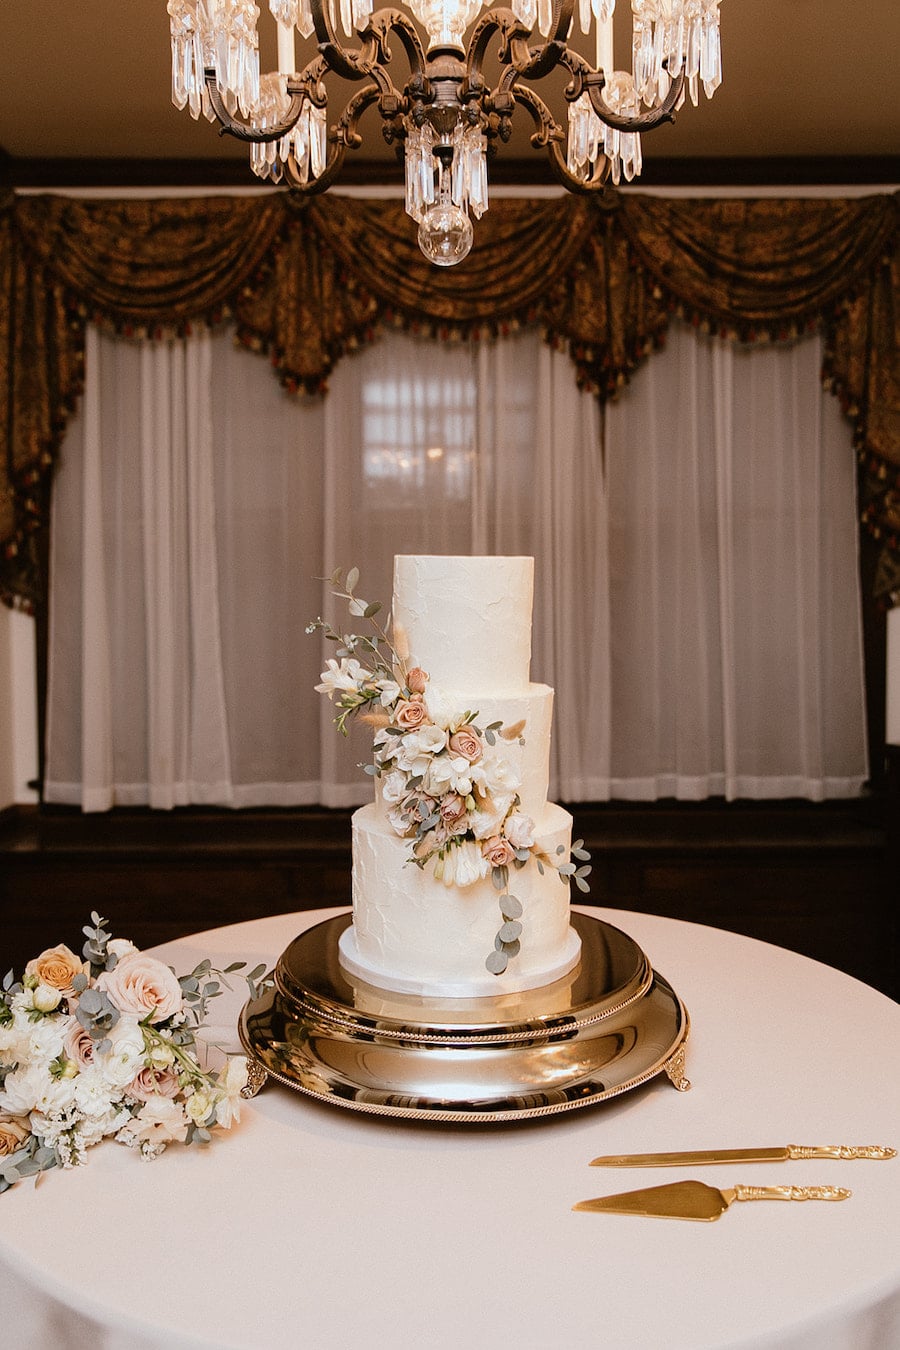 * Simple but elegant wedding cake with buttercream icing and fresh flowers and greenery at garden wedding venue CJ’s Off the Square near Nashville, TN. 